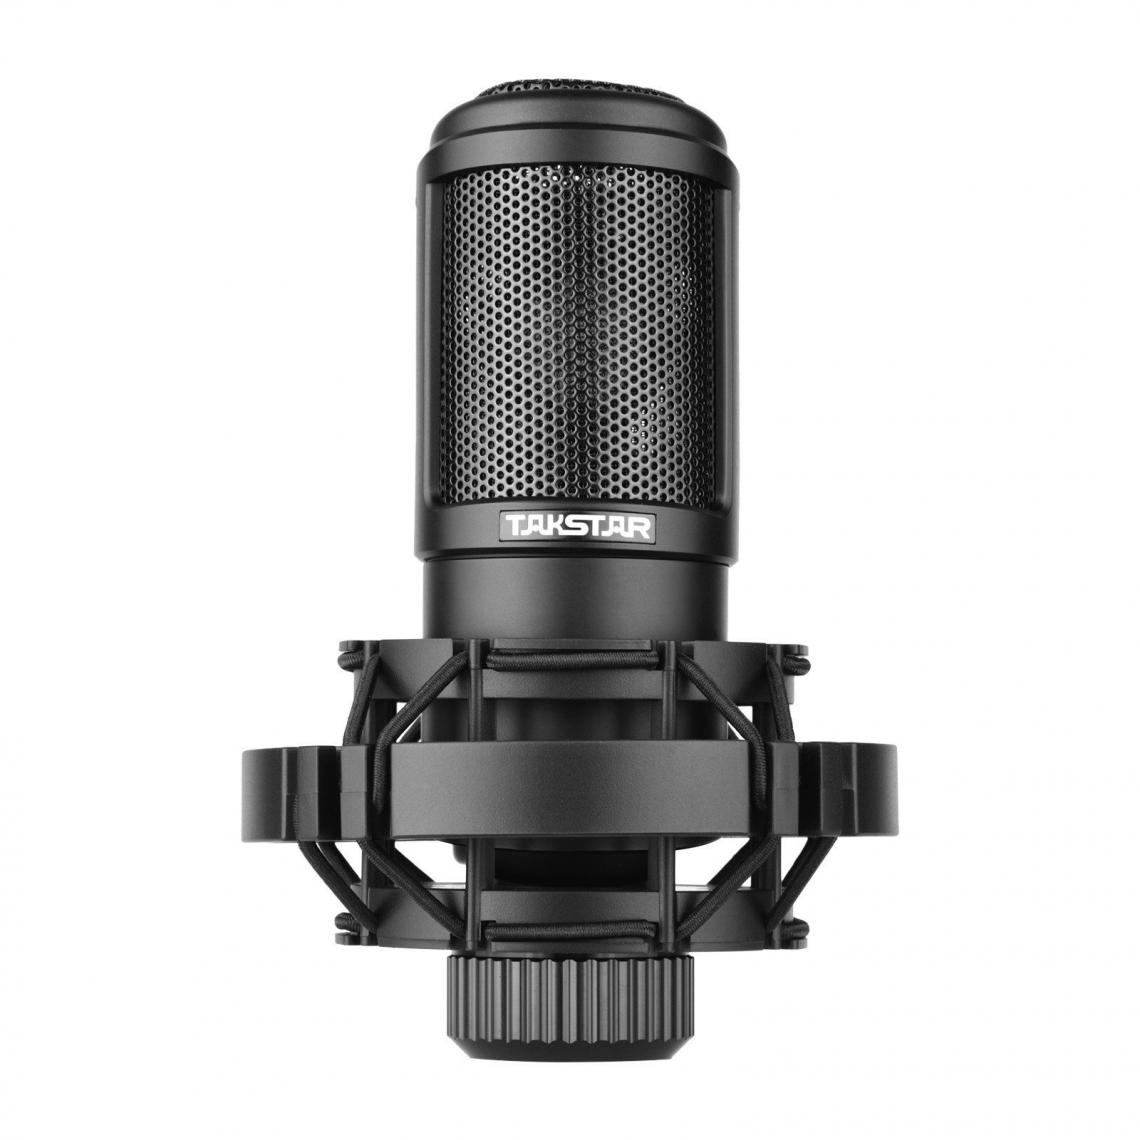 Justgreenbox - Side-address Microphone Wired Condenser Mic Cardioid Pickup Pattern with Shock Mount and Tripod - 1005001672560198 - Micros instrument